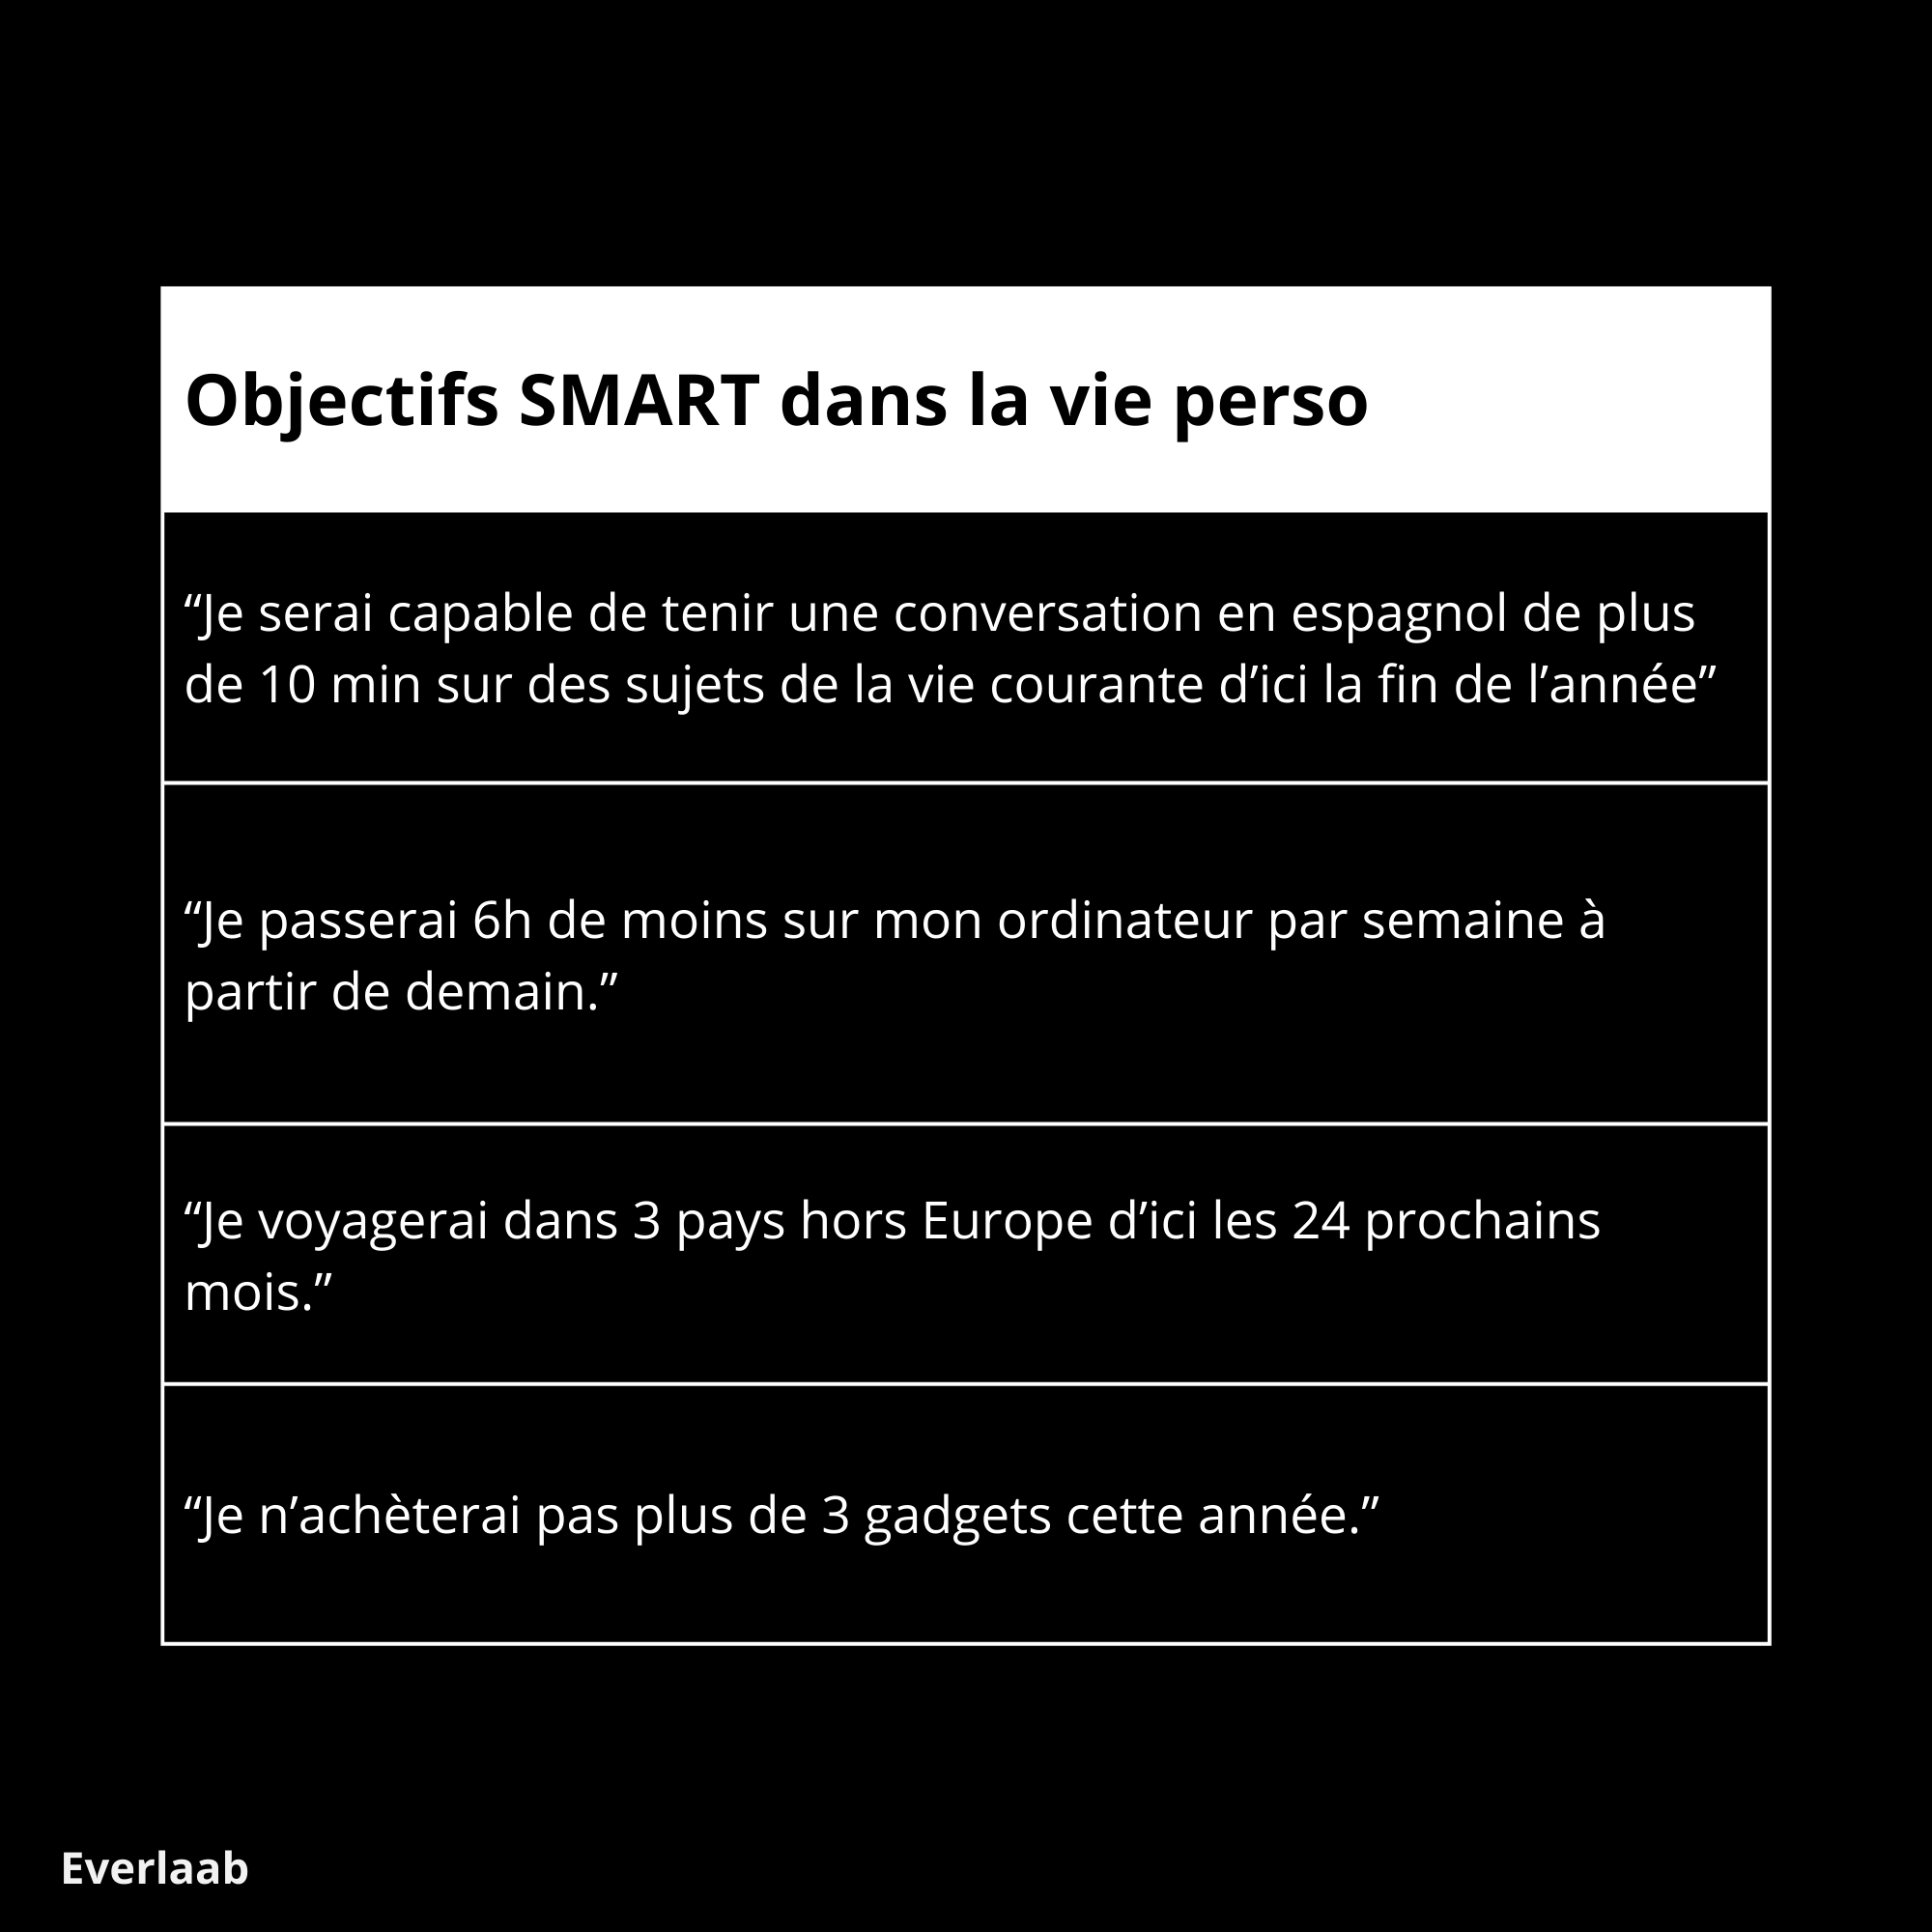 exemples d'objectifs smart vie perso